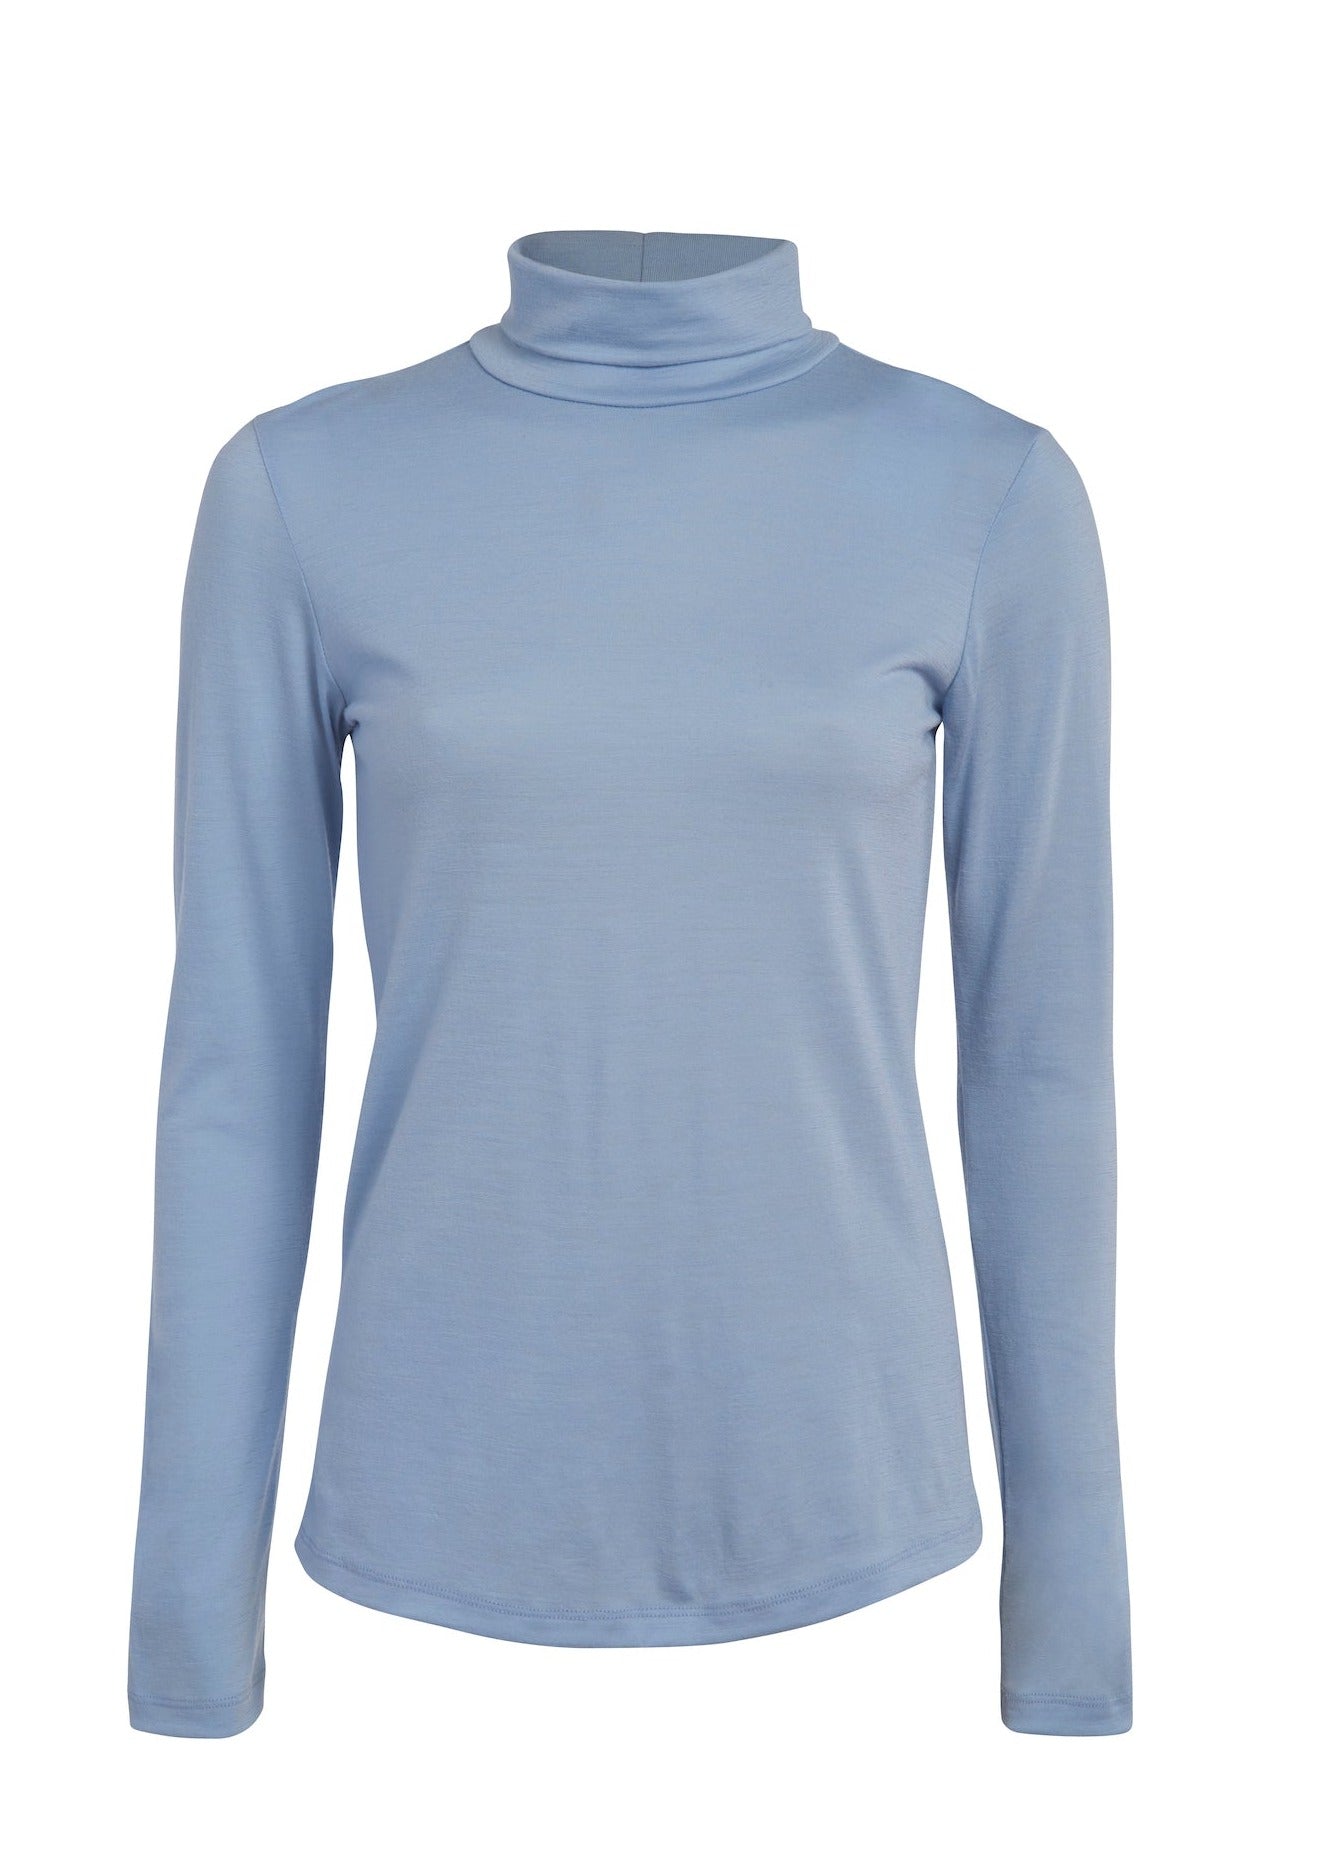 A timeless turtleneck, this layering piece in ethical merino wool is soft and breathable designed for comfort and versatility in your everyday life.